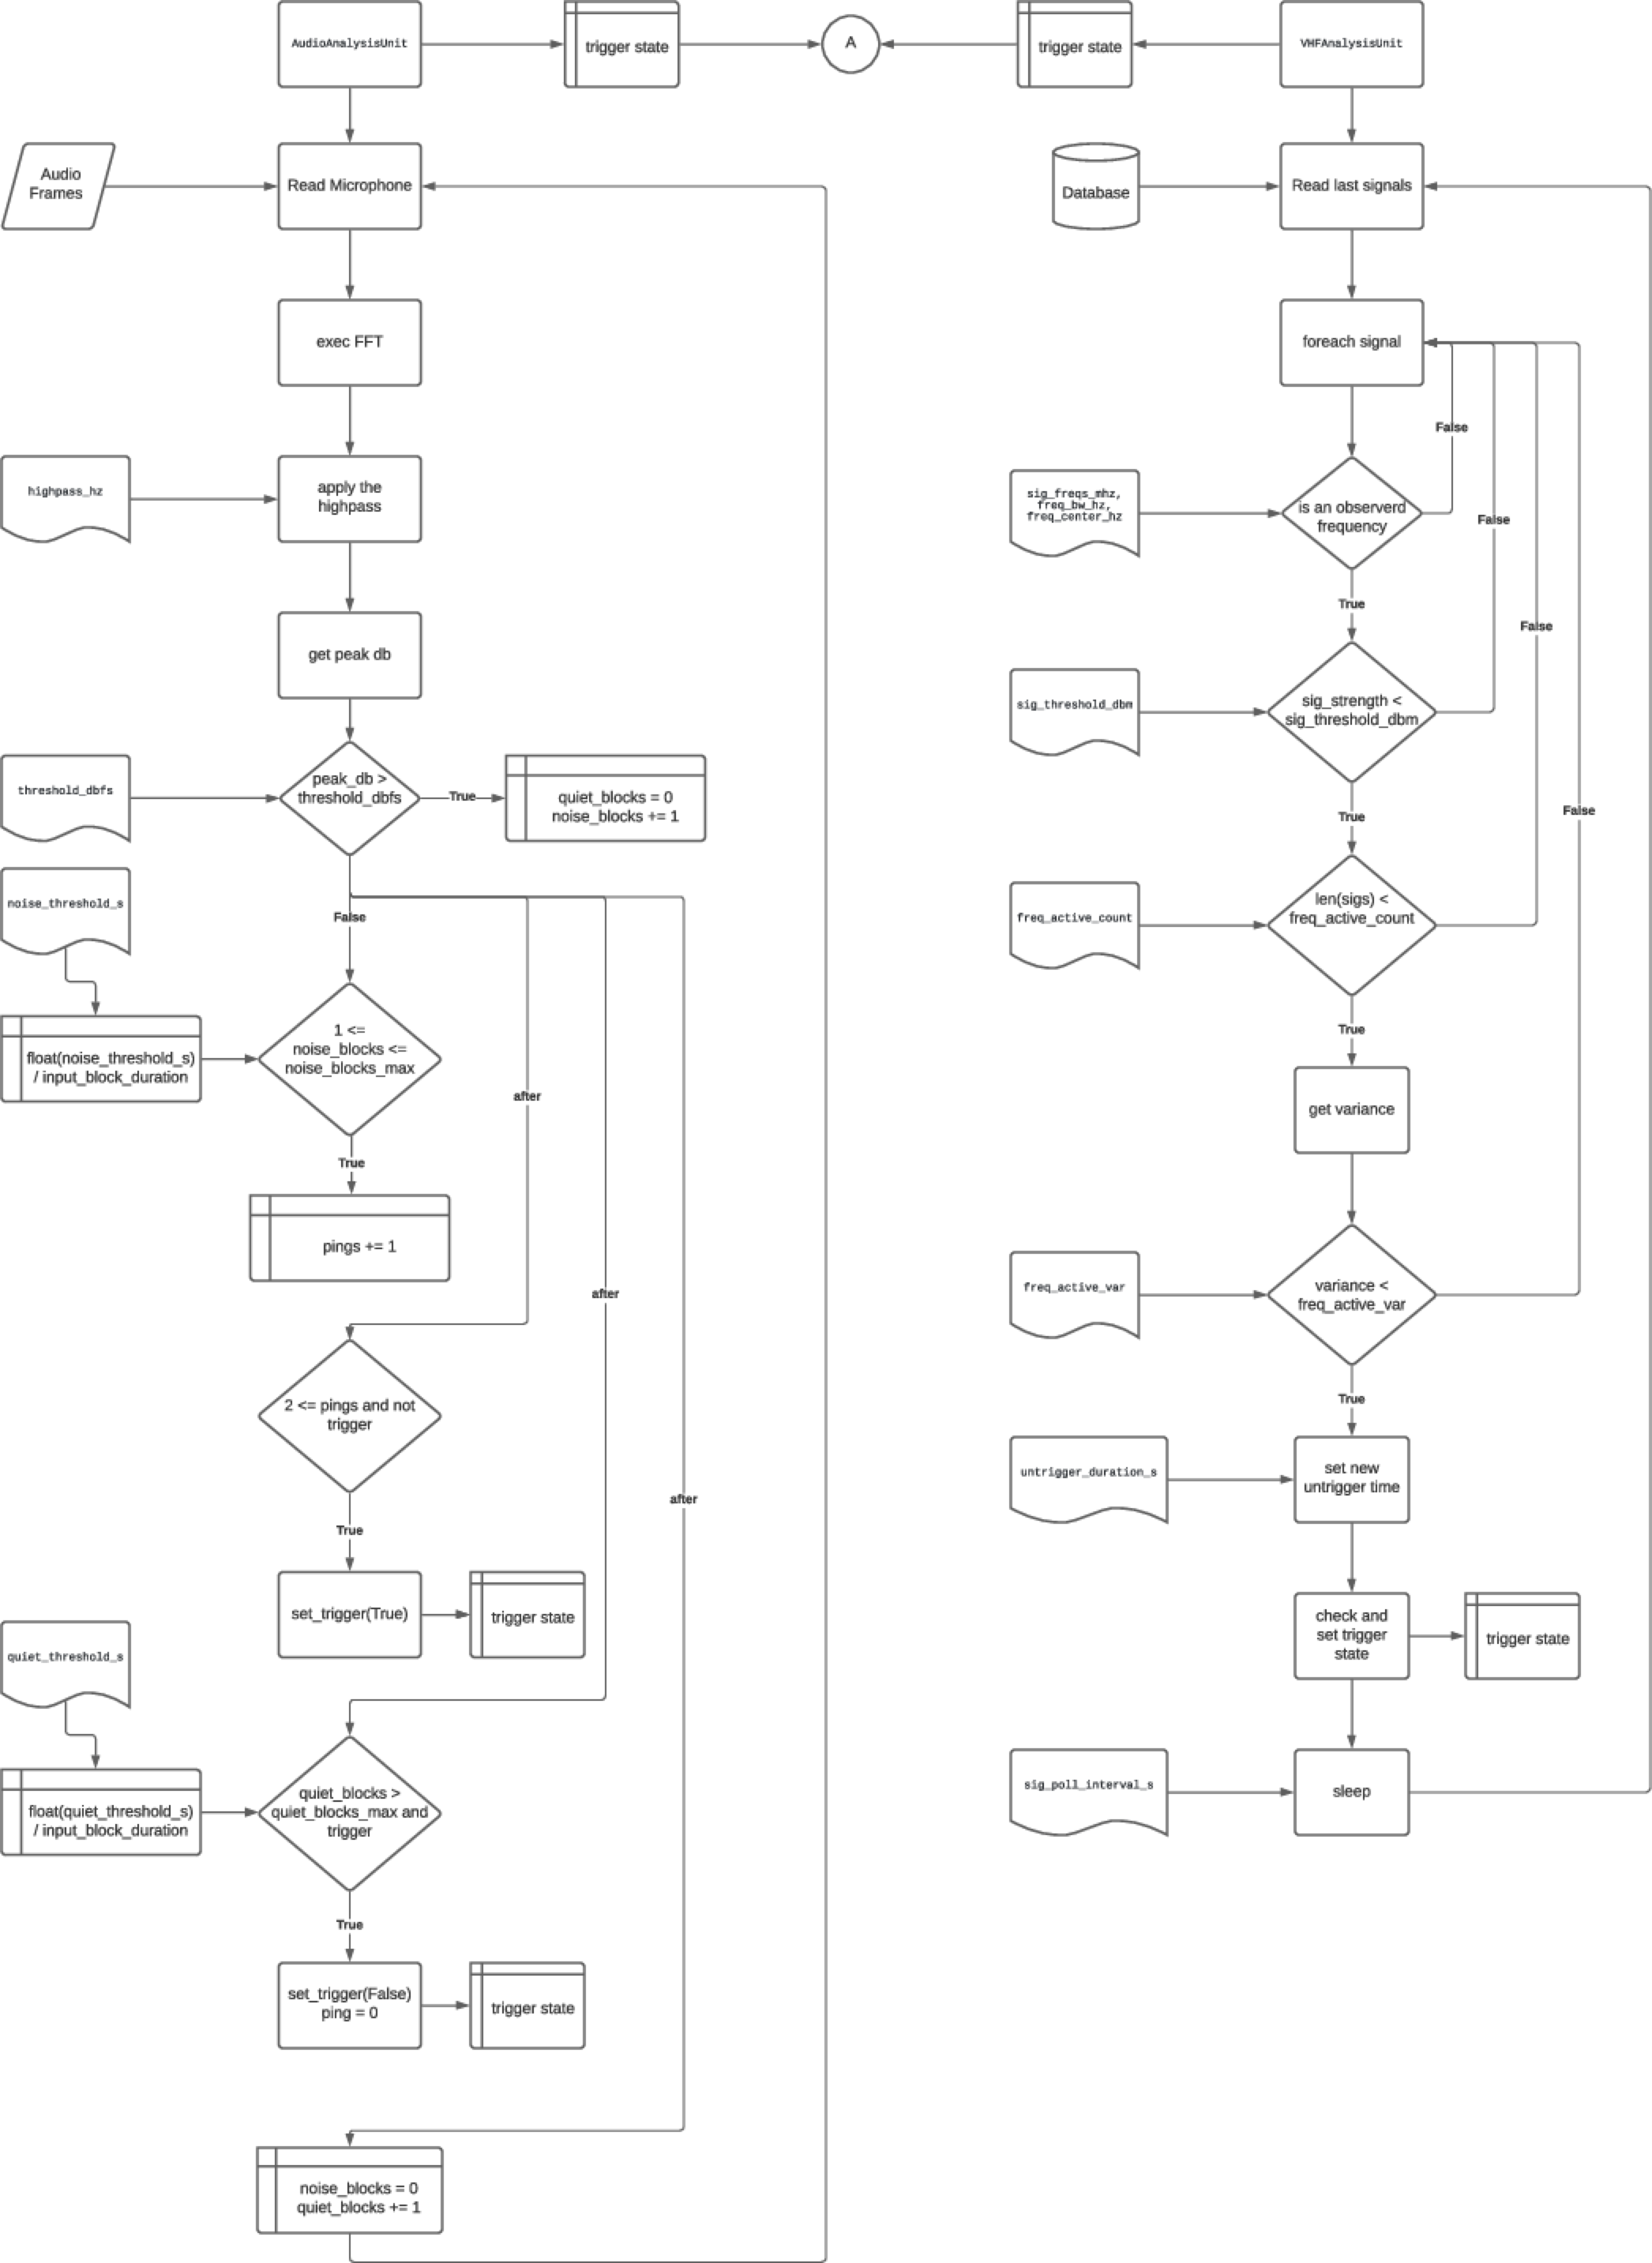 Flowchart of audio and video unit